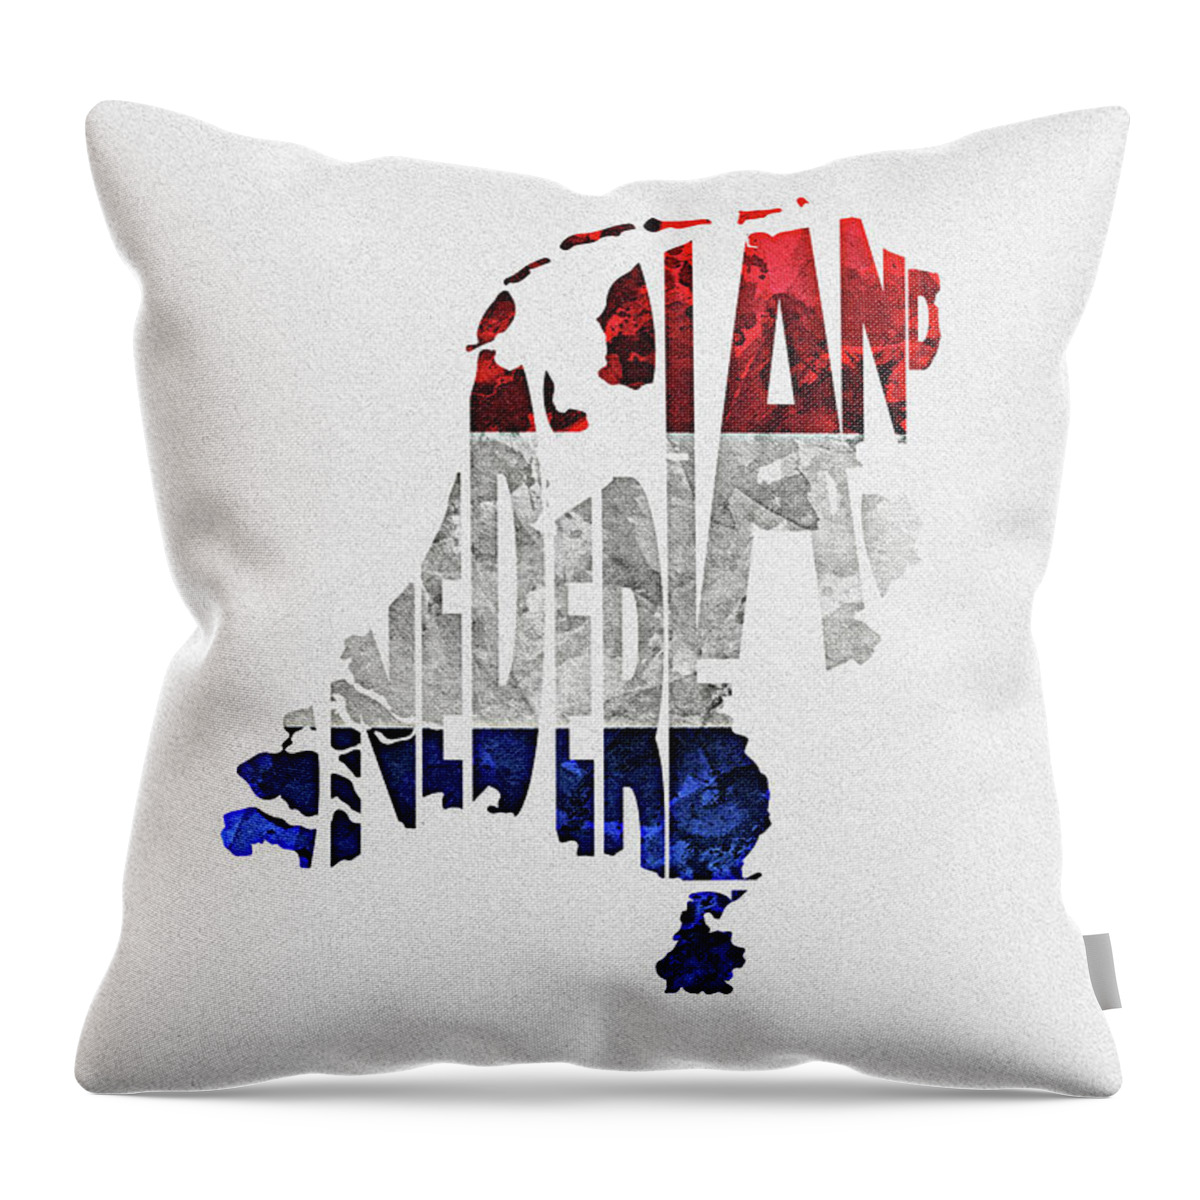 The Netherlands Throw Pillow featuring the digital art The Netherlands Typographic Map Flag by Inspirowl Design